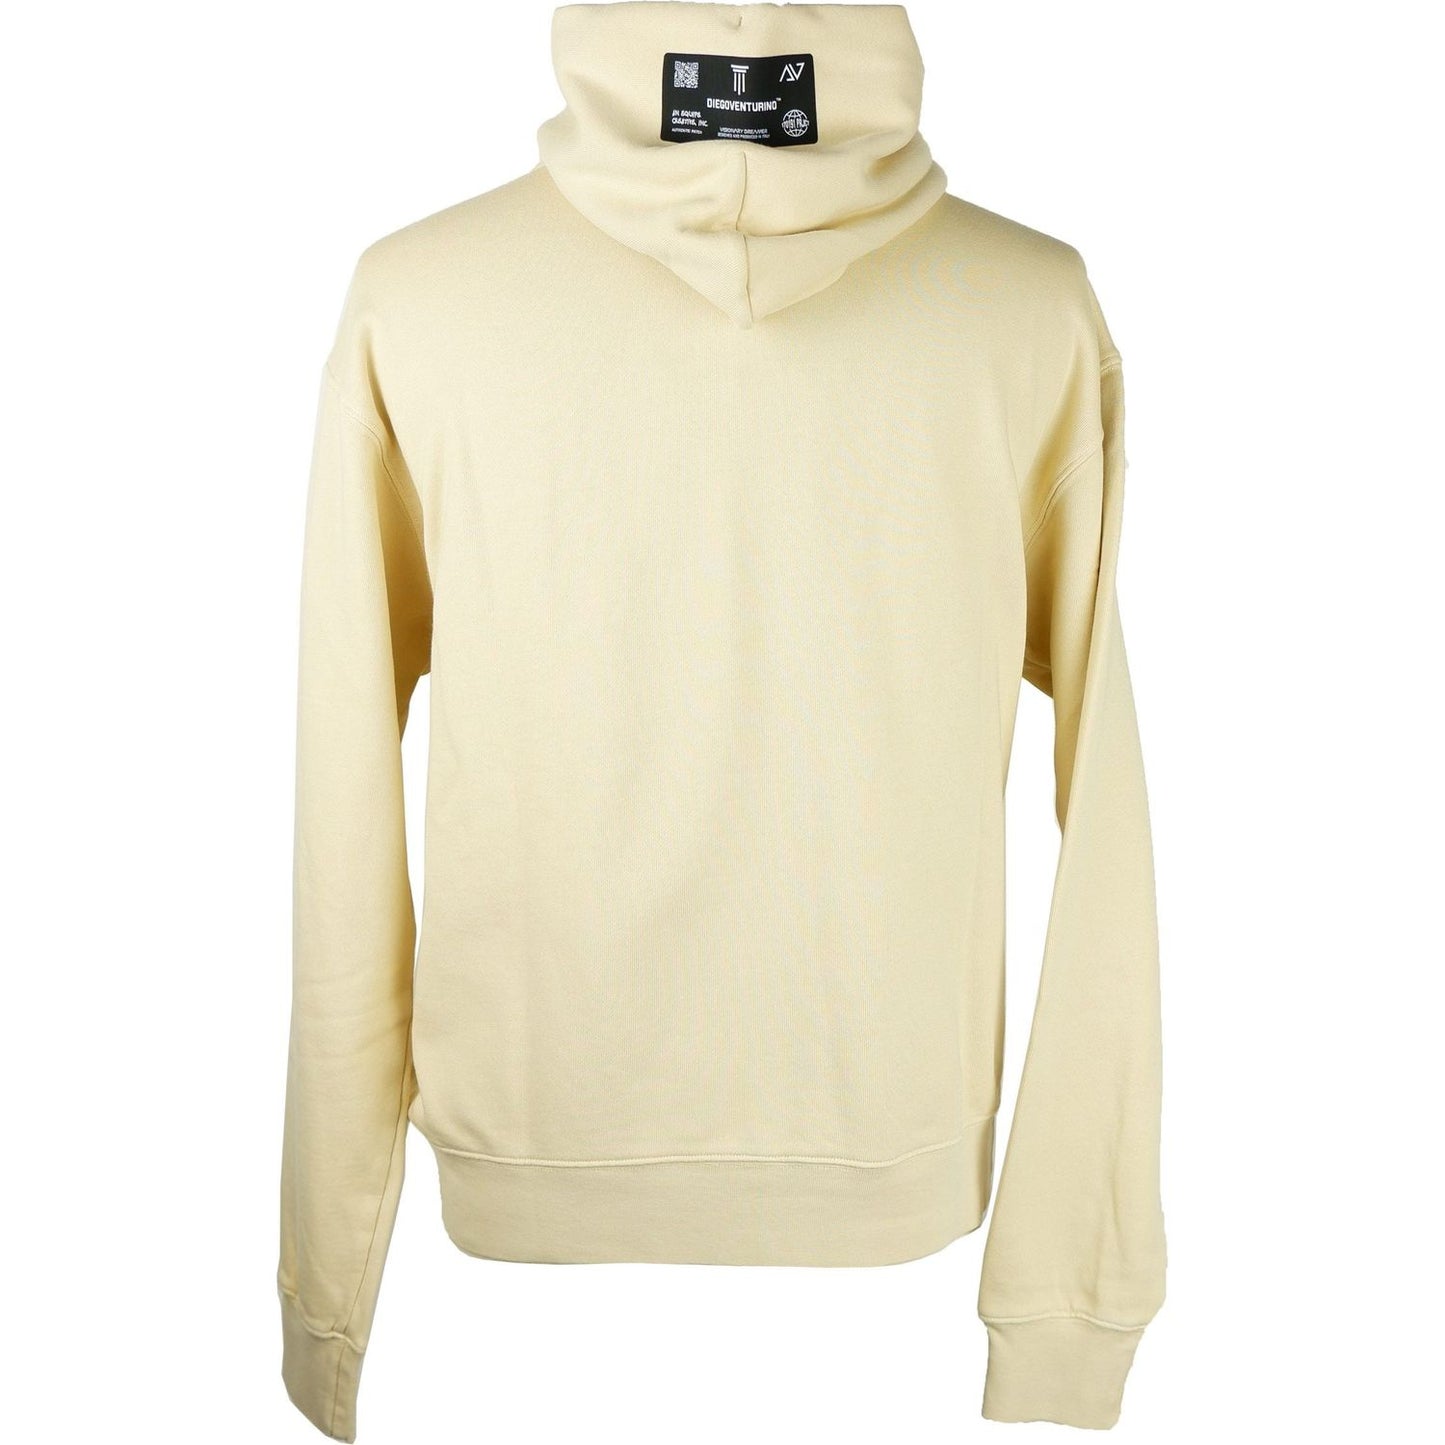 Diego Venturino Classic Beige Hoodie With Signature Design MAN TOPS AND SHIRTS dndvflhnpp-sand-diego-venturino-sweater product-6827-225739365-scaled-c754ba02-e17.jpg